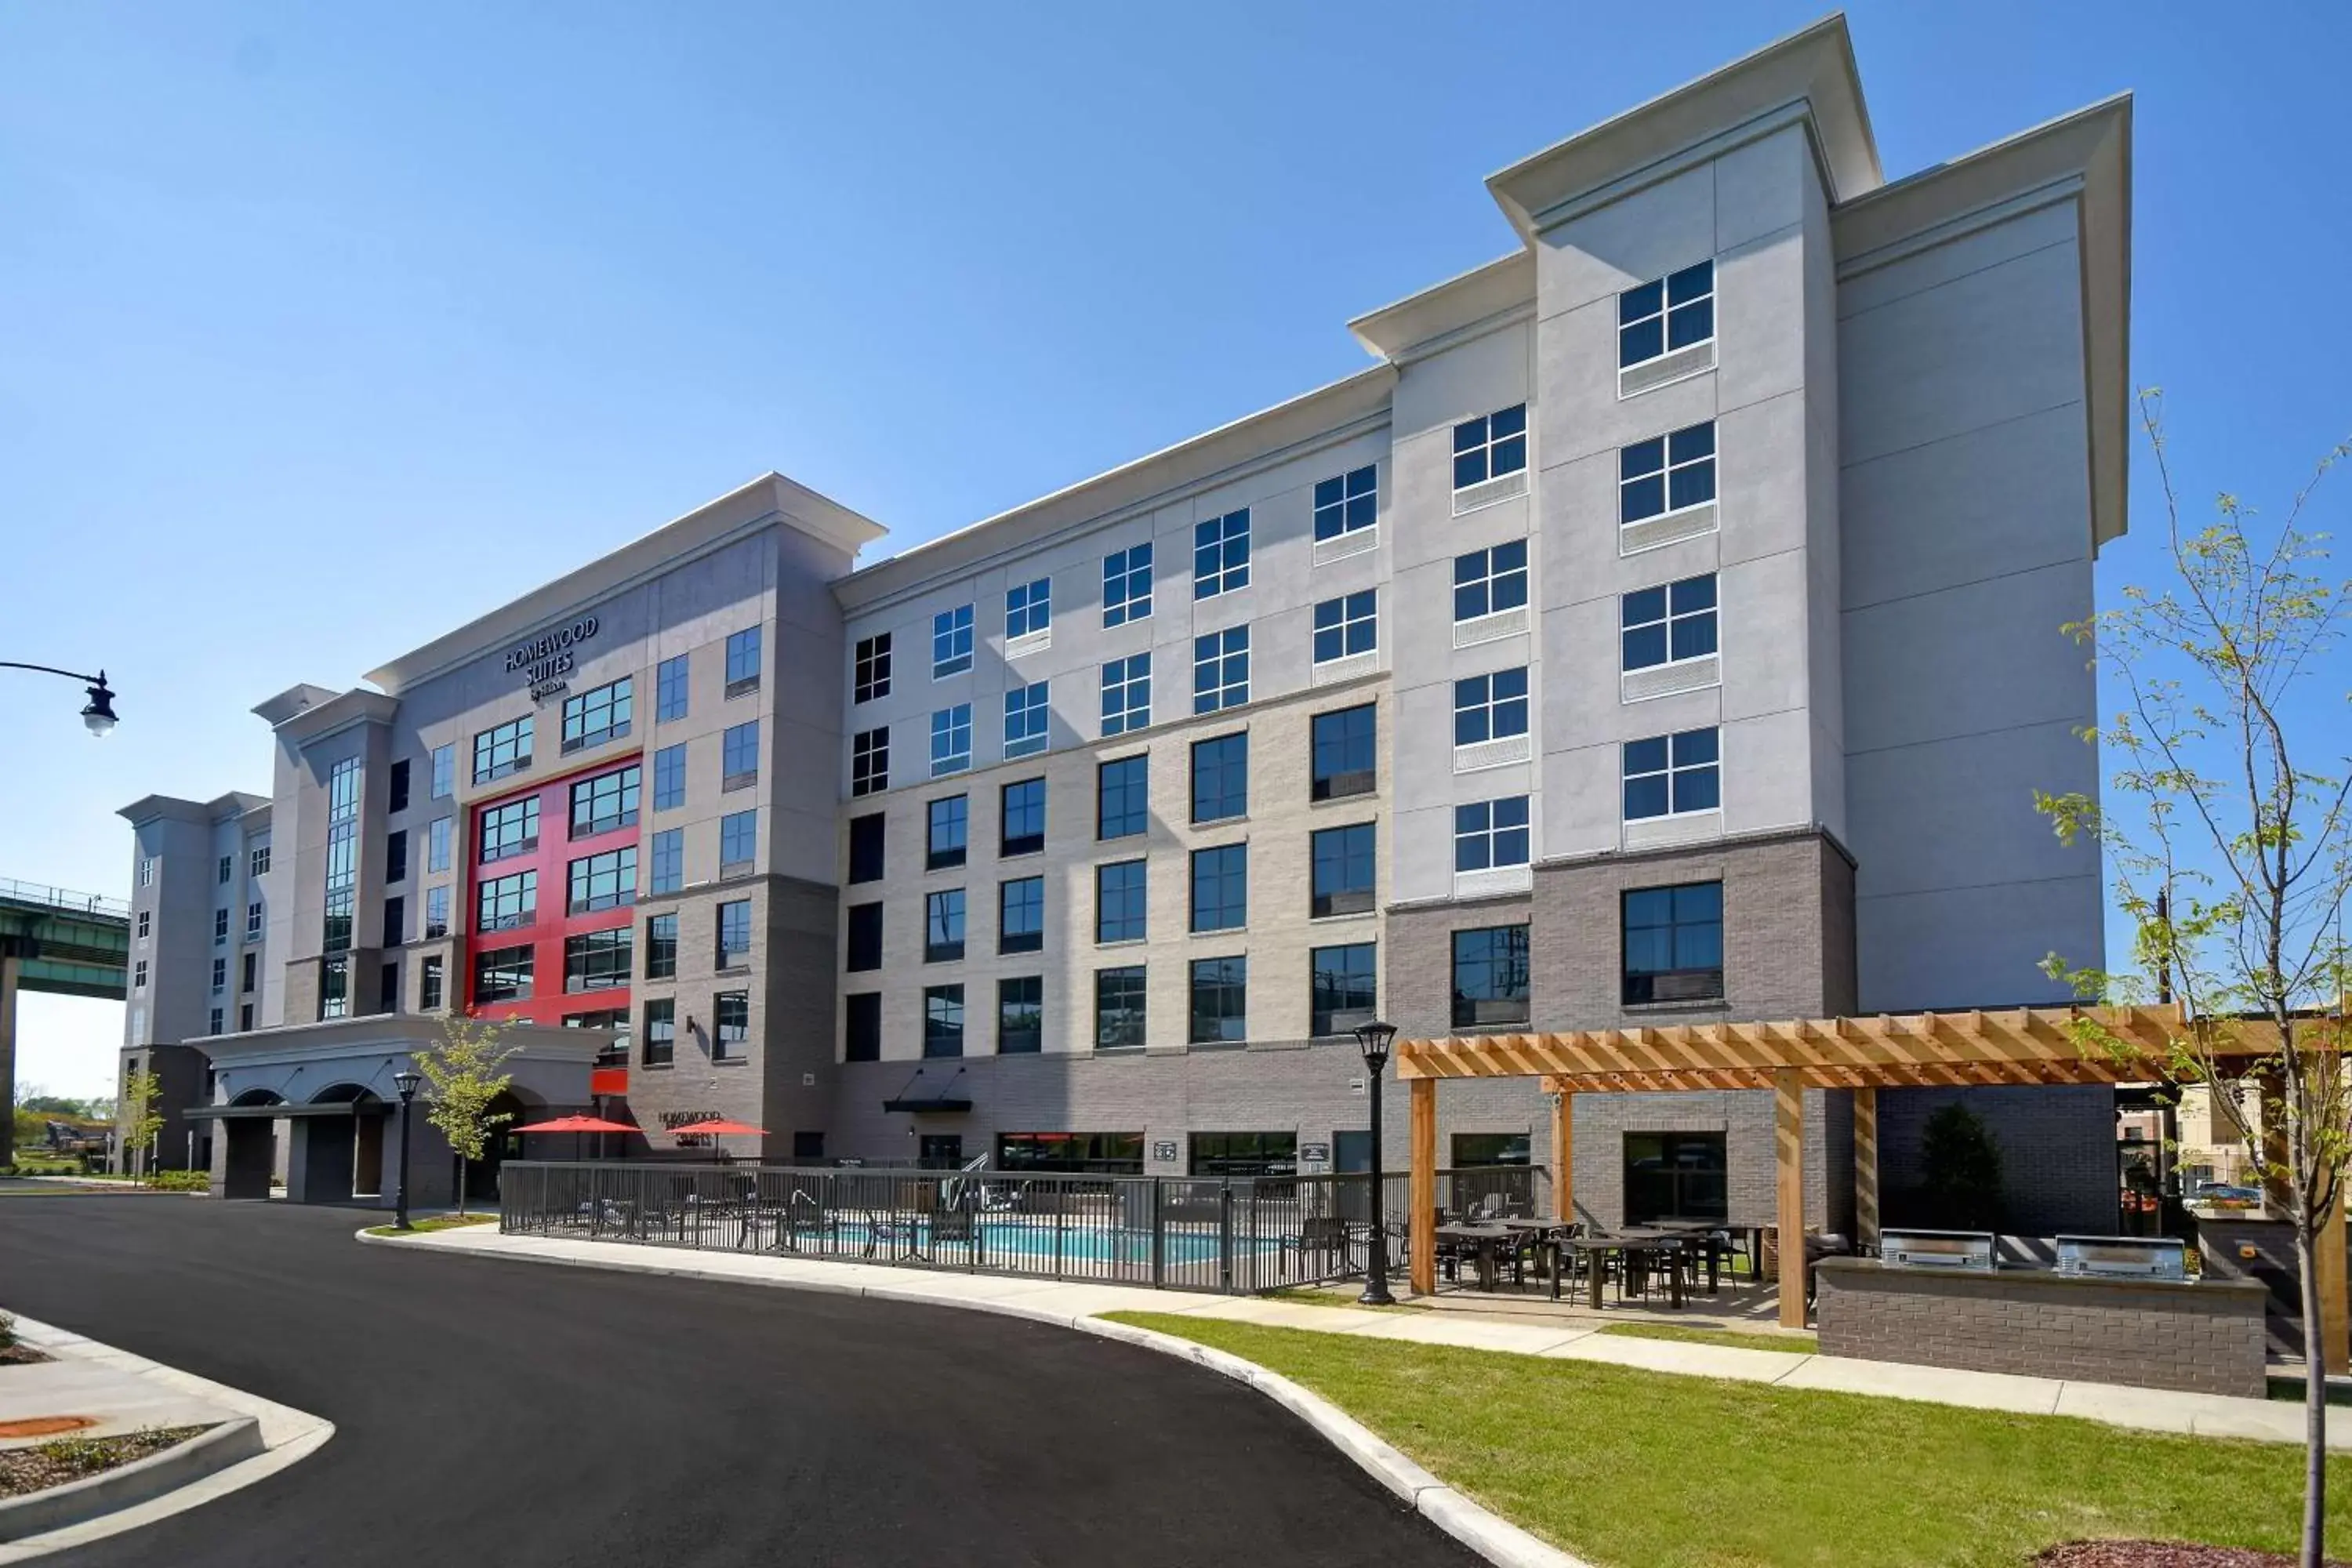 Property Building in Homewood Suites by Hilton Tuscaloosa Downtown, AL